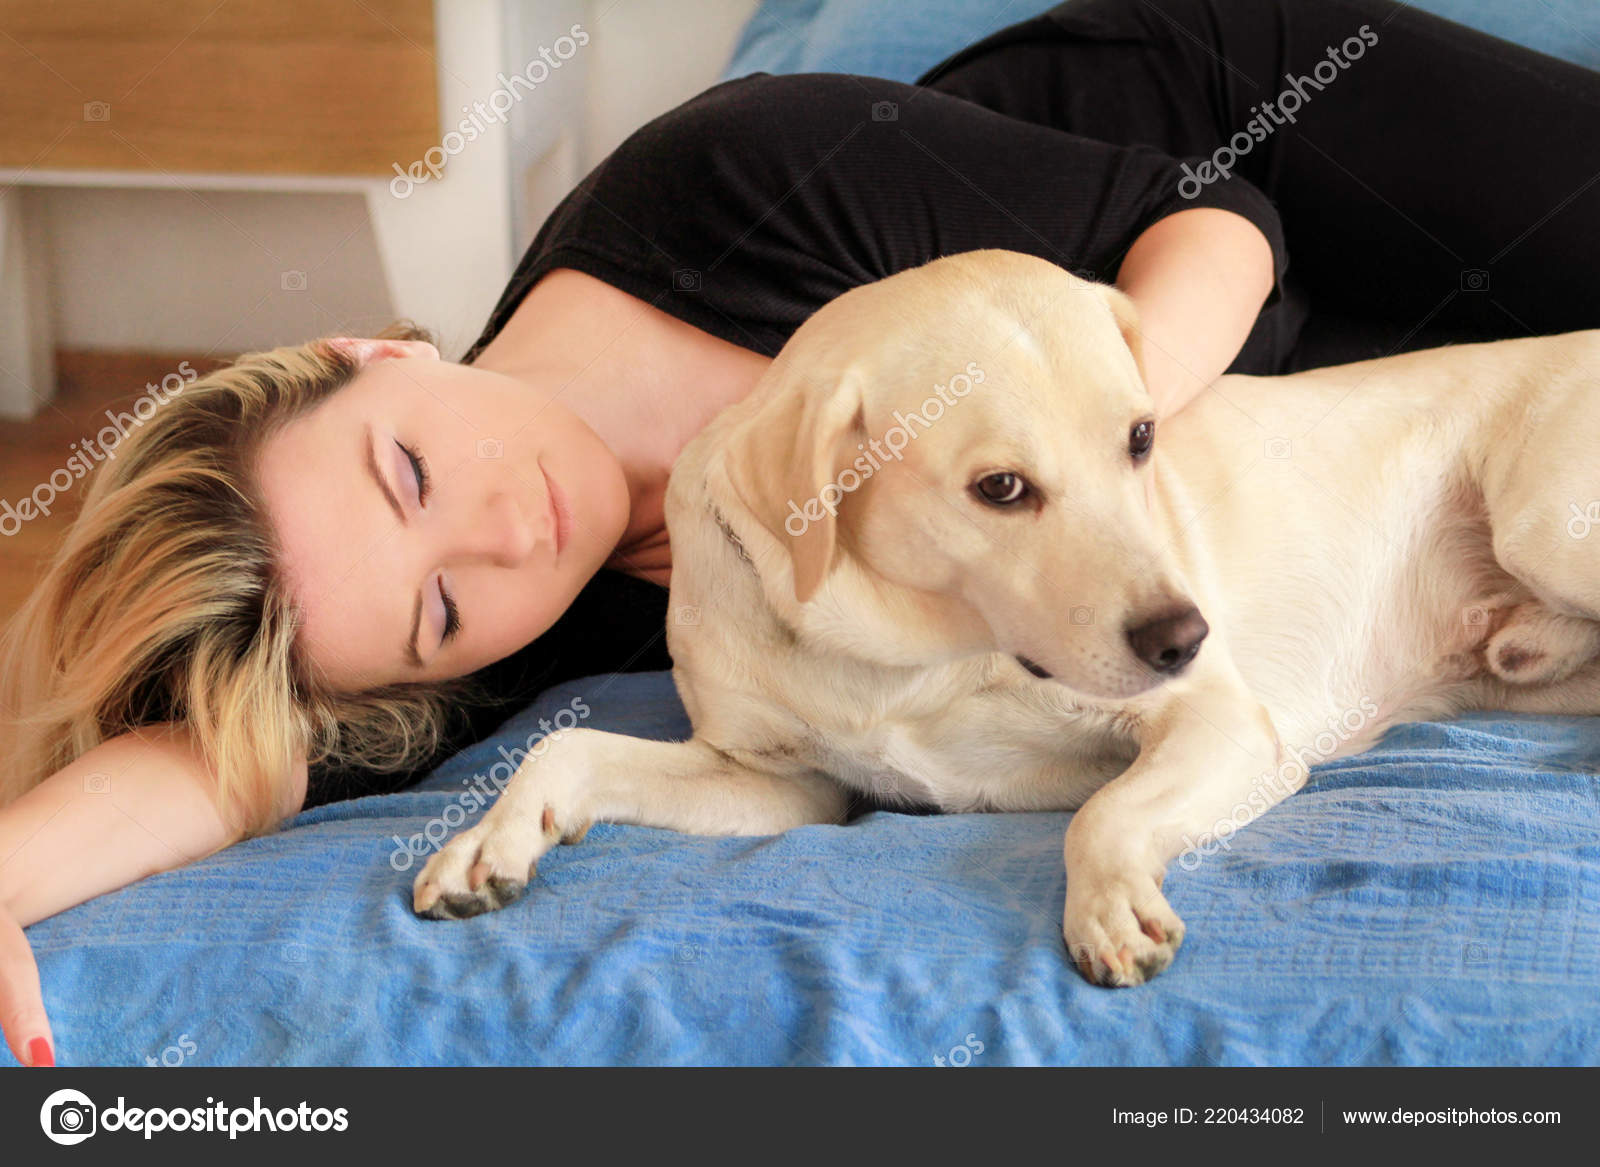 Woman Cute Dogs Home Handsome Girl Resting Sleeping Her Dog